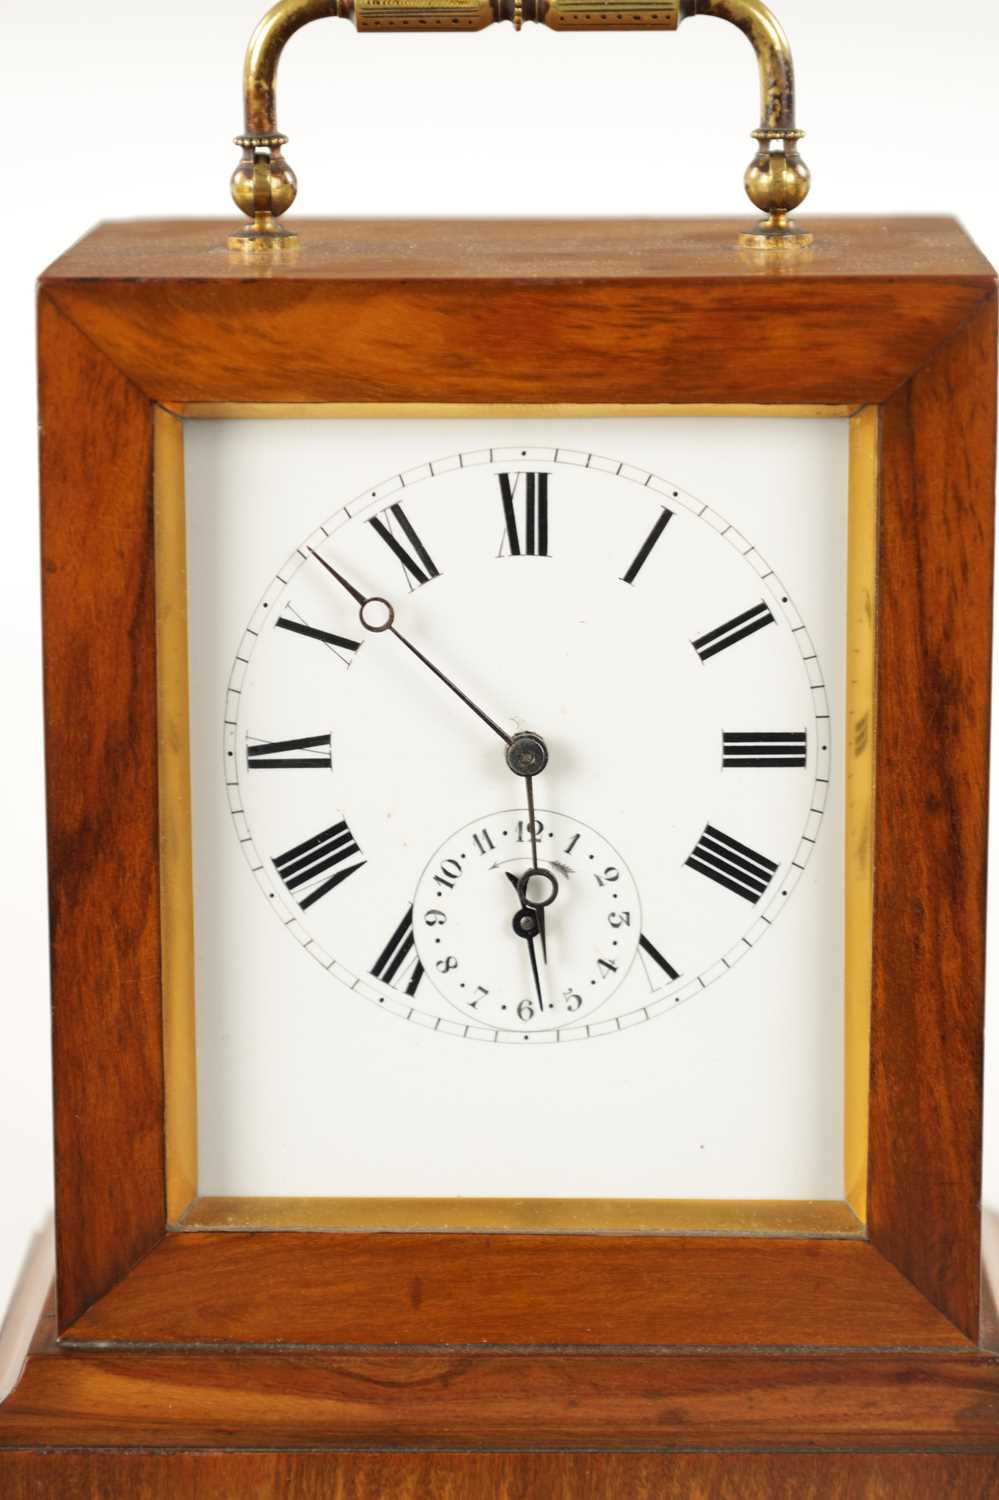 A LATE 19TH FRENCH CARRIAGE-STYLE MANTEL CLOCK WITH ALARM - Image 3 of 7